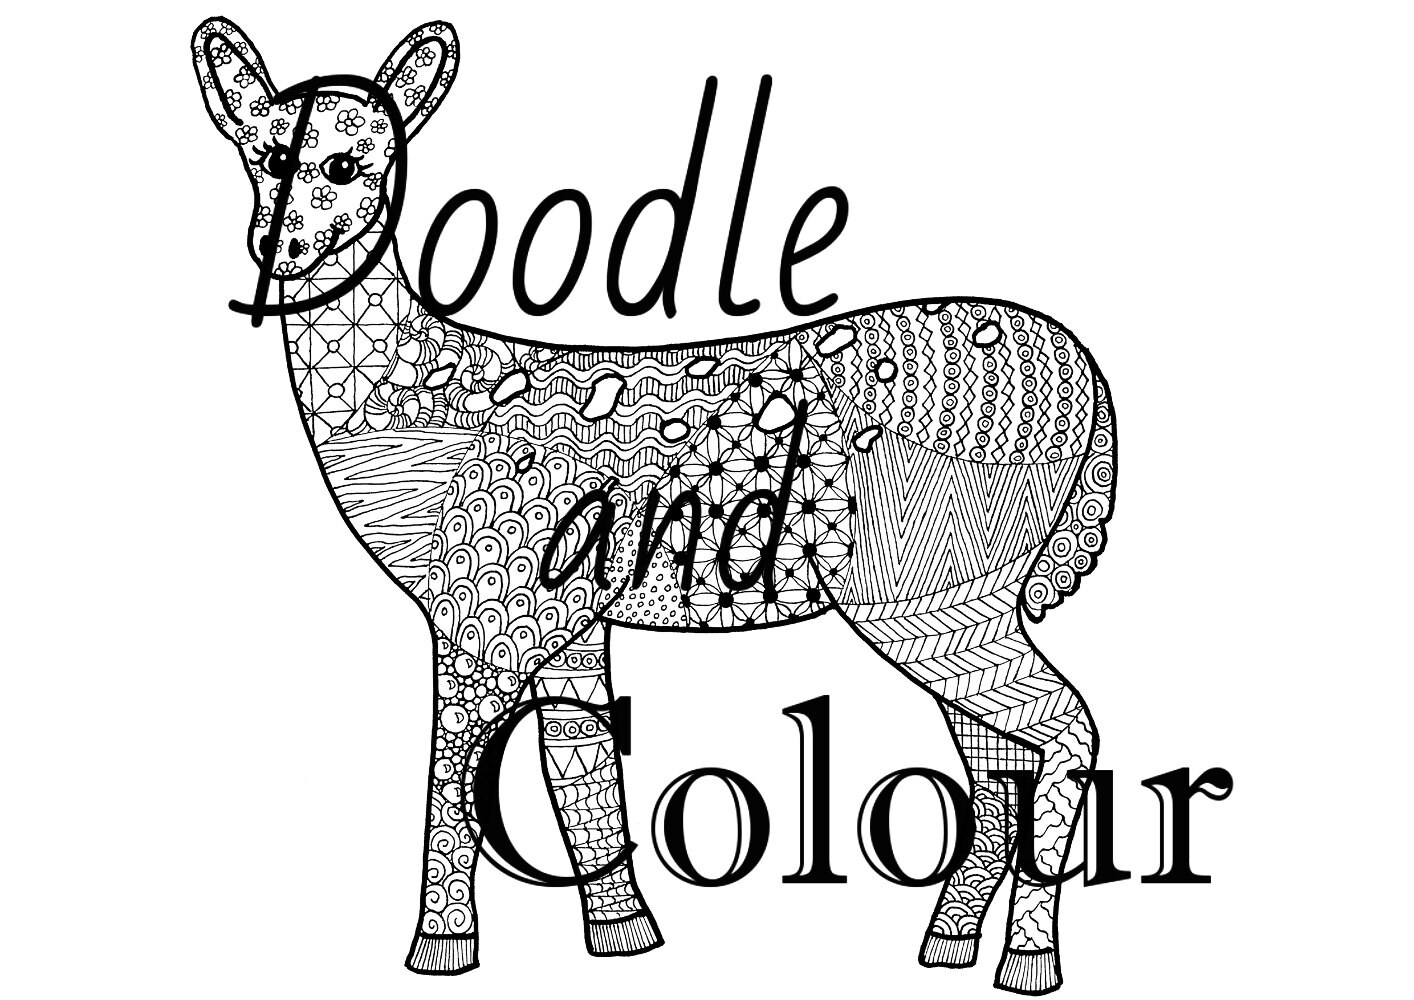 Download Deer Colouring Page for Adults and Teenagers/Older Children